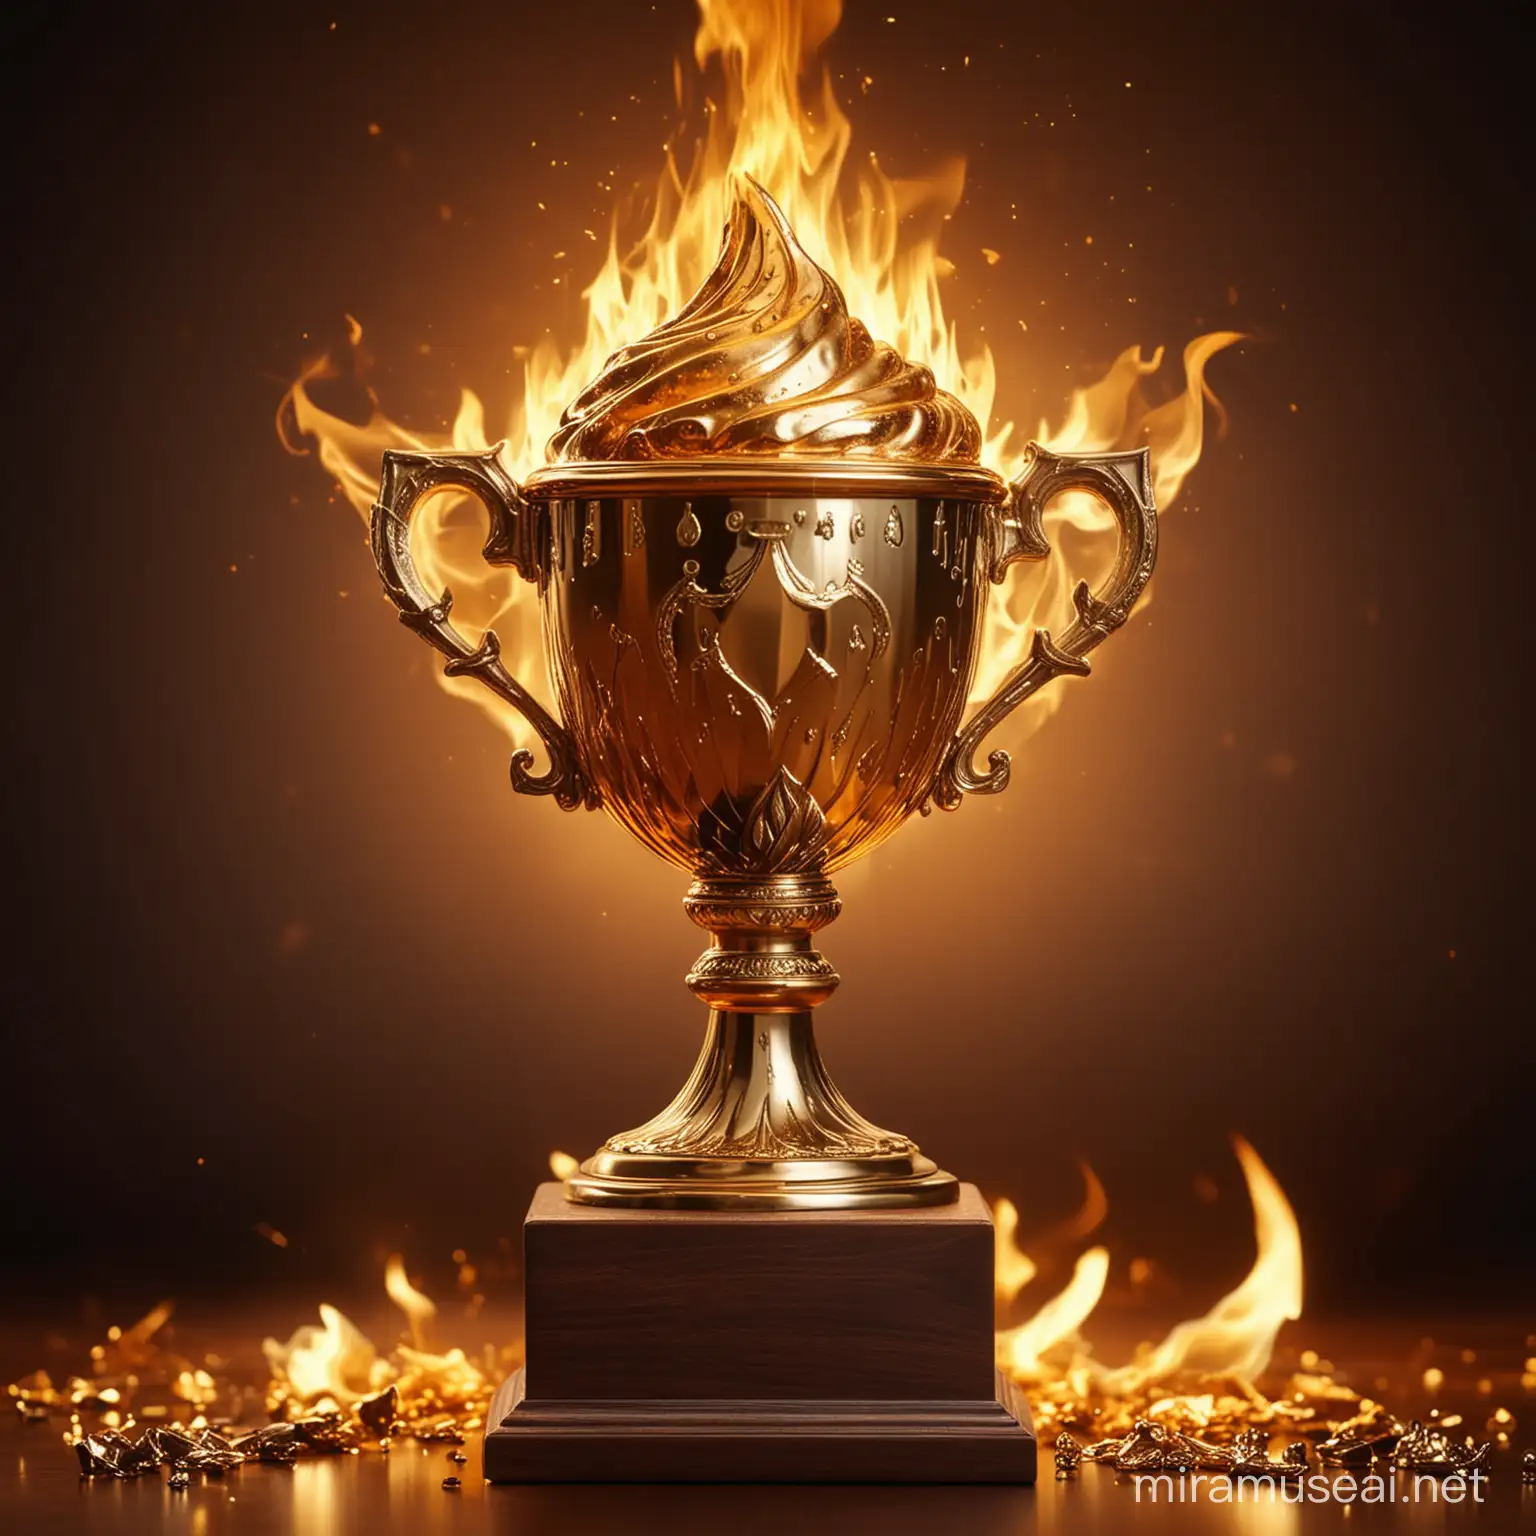 golden trophy with a golden piece of shit on top of it, the background is fire flames, luminous image